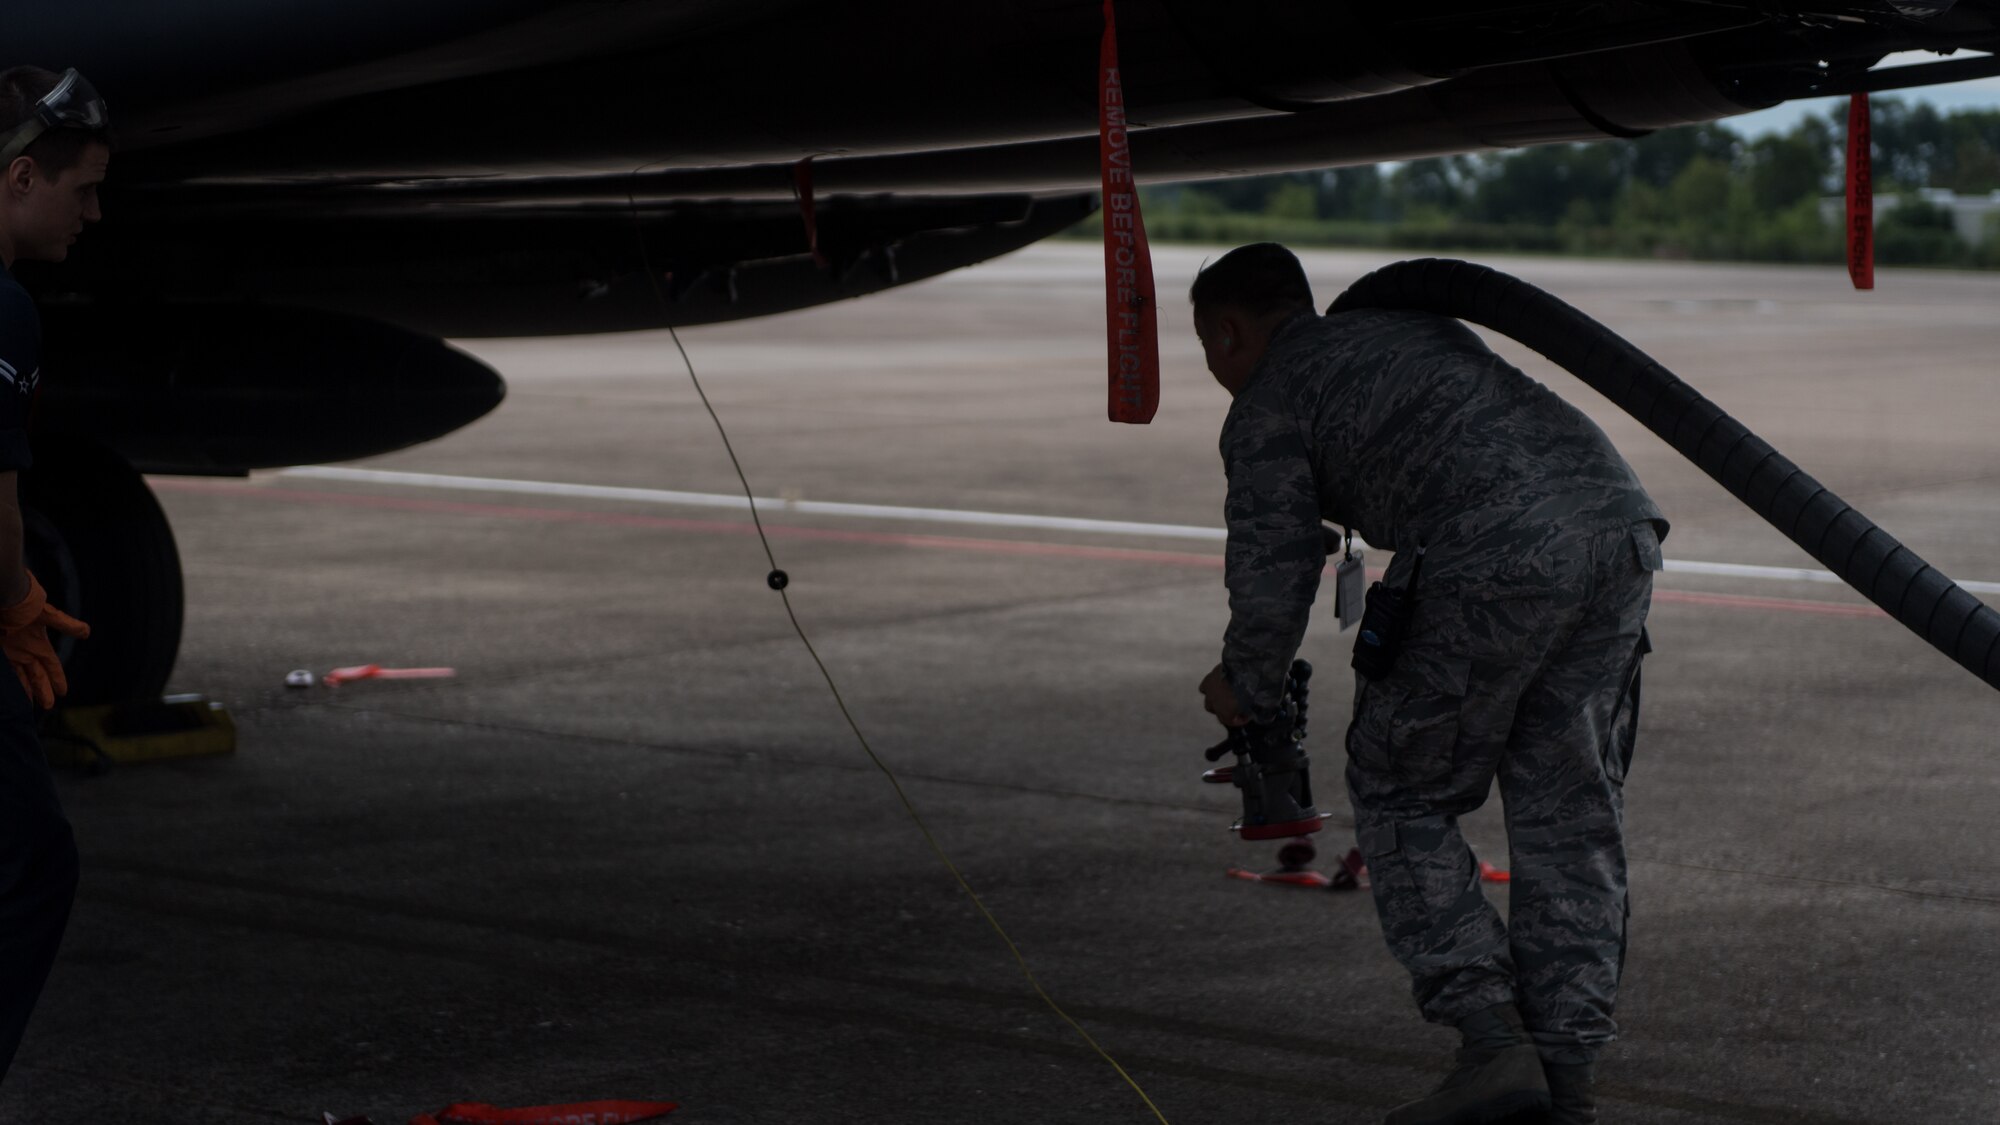 An Airman from the 2nd Logistic Readiness Squadron petroleum, oils and lubricants distribution flight prepare to fuel F-15E Strike Eagles from Seymour Johnson Air Force Base, North Carolina at Barksdale Air Force Base, La., Sept. 12, 2018. The aircraft evacuated to Barksdale to avoid possible damage from Hurricane Florence.